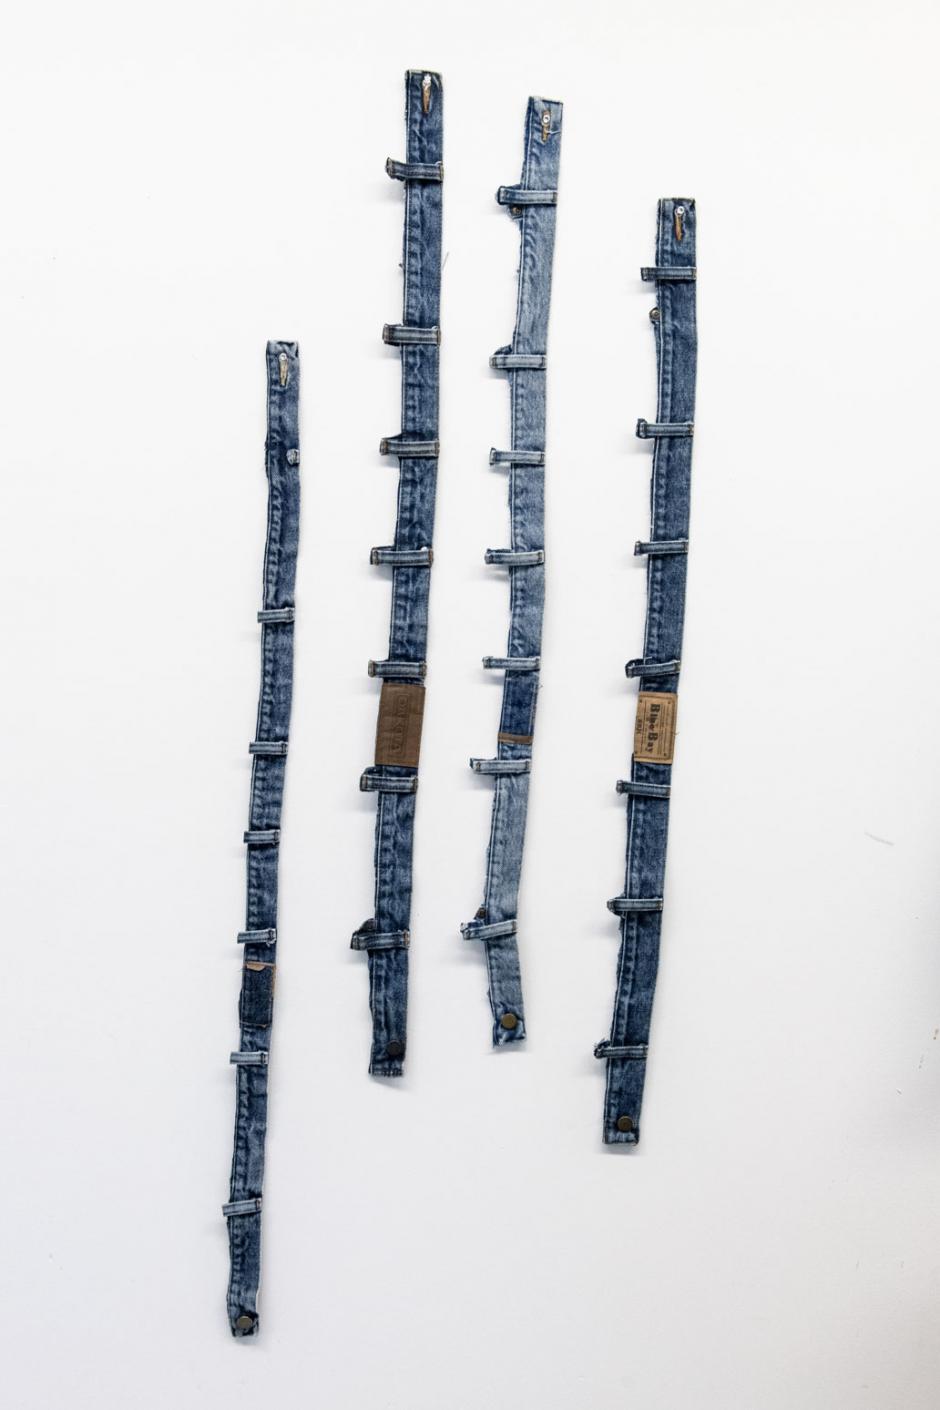 Denim artwork created by Stina Baudin exhibited on a white wall